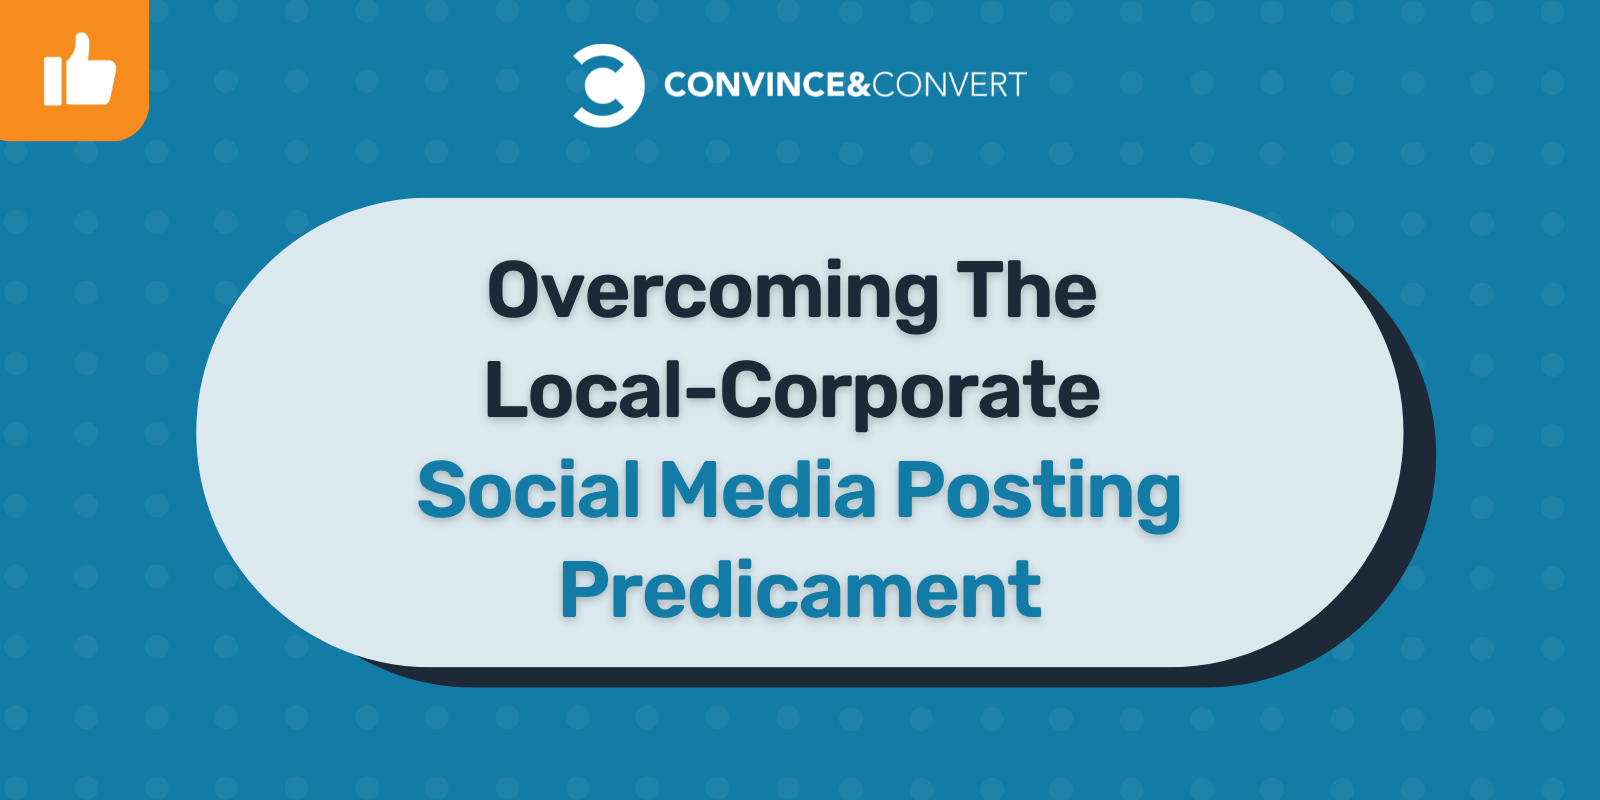 You are currently viewing Overcoming The Local-Corporate Social Media Posting Predicament